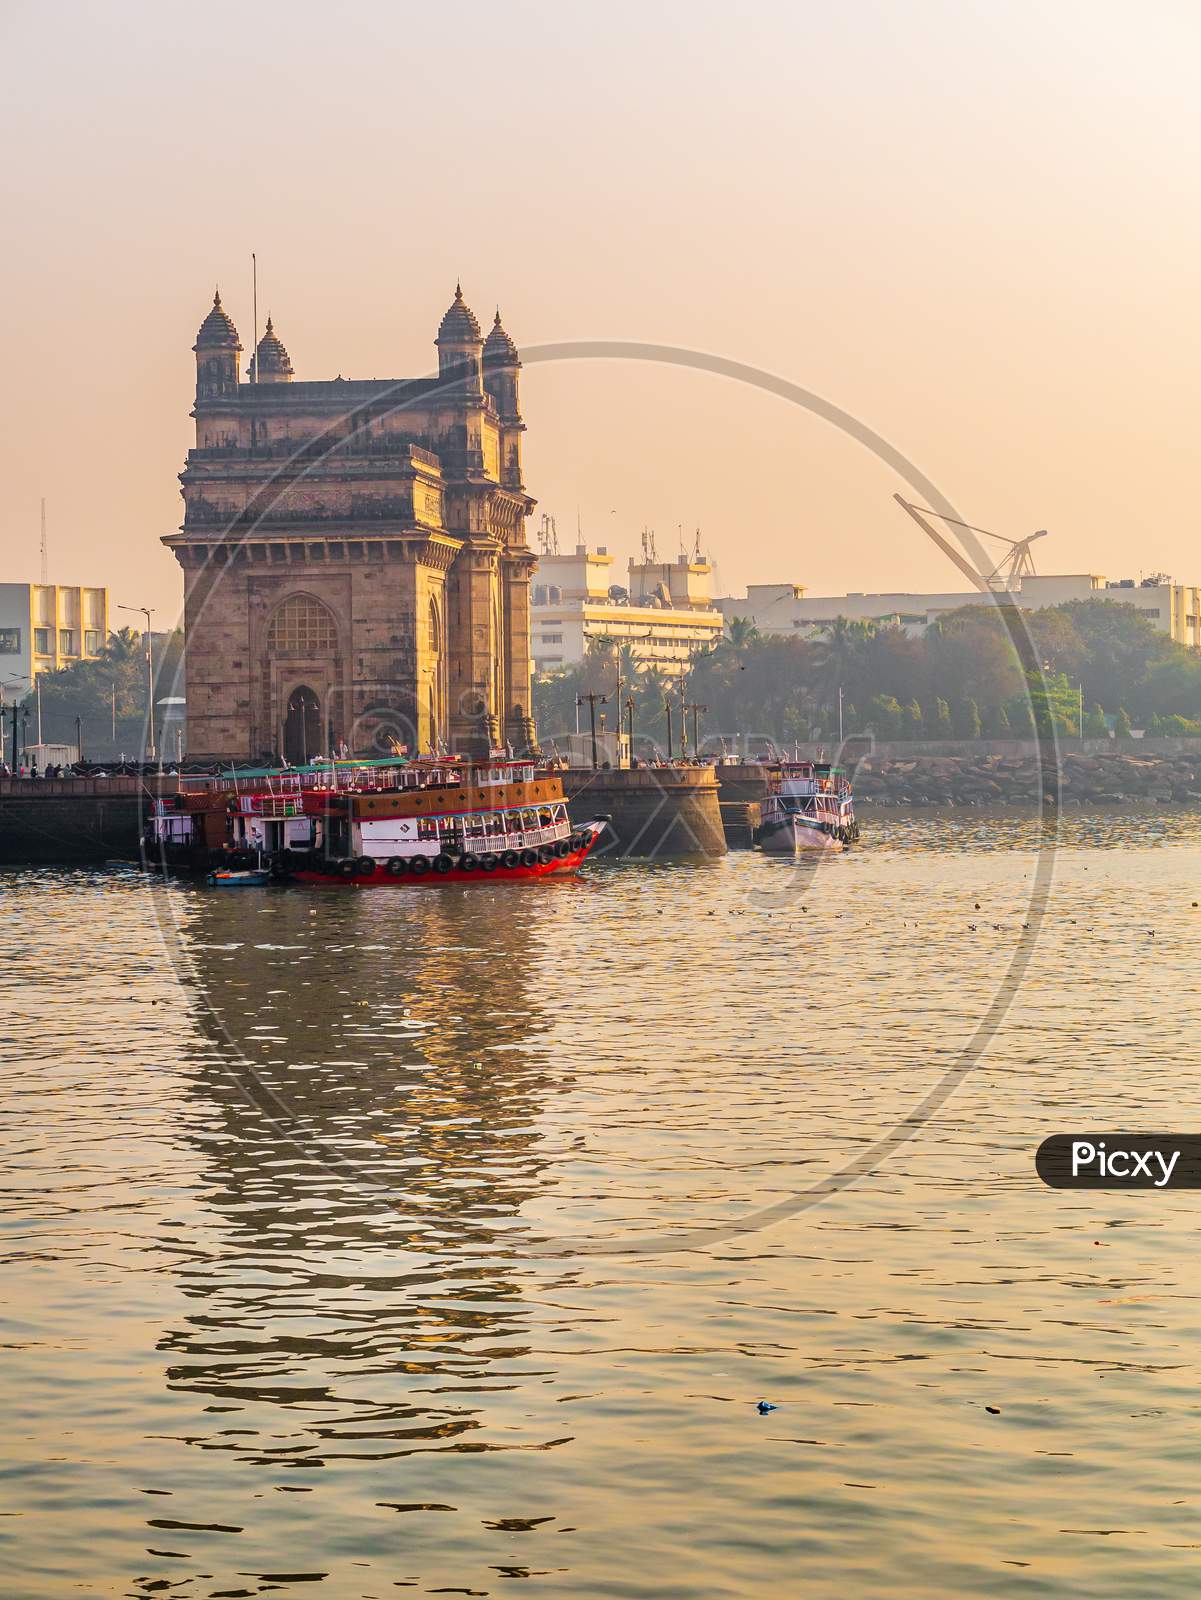 The Gateway Of India Is An Arch-Monument Built In The Early Twentieth Century In The City Of Mumbai, The Most Visited Tourist Place.